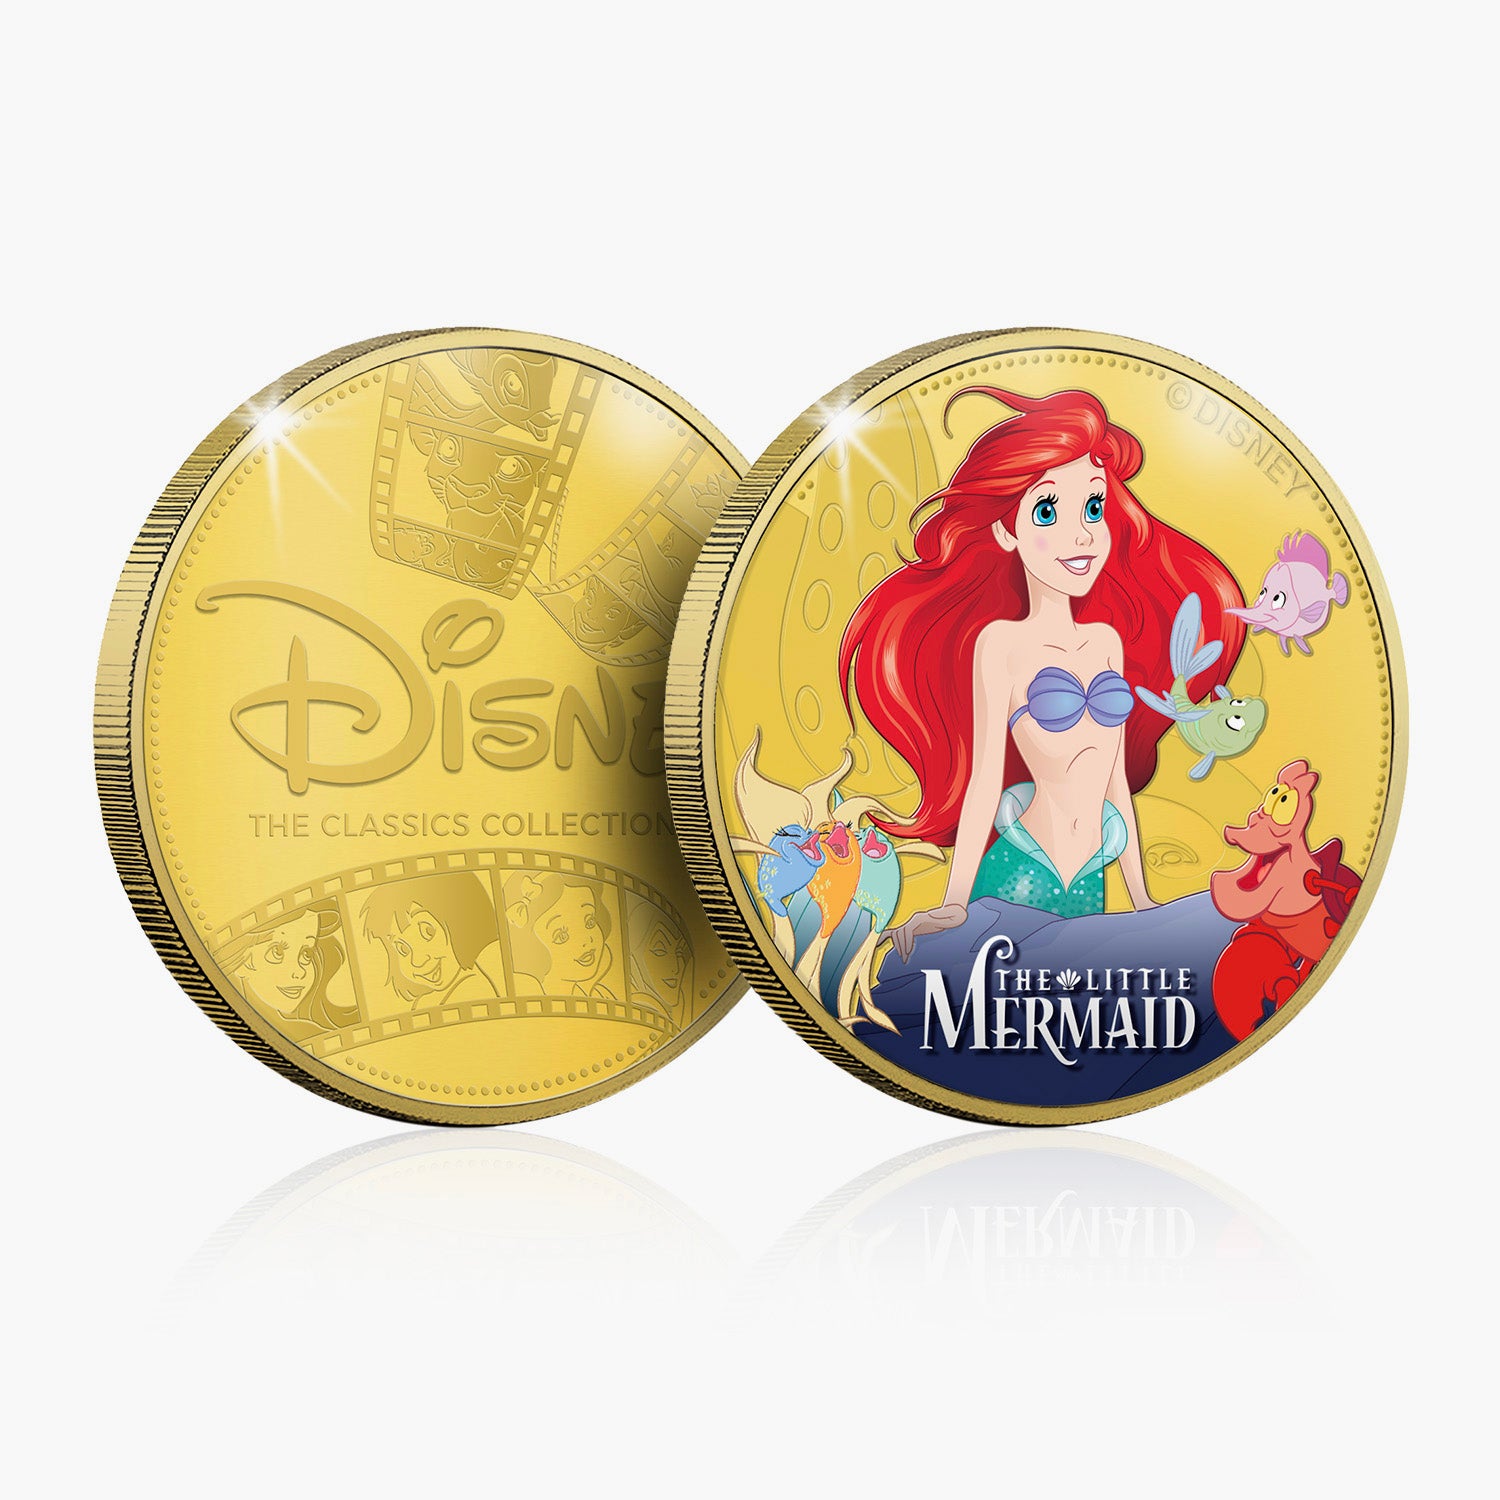 The Little Mermaid Gold-Plated Commemorative